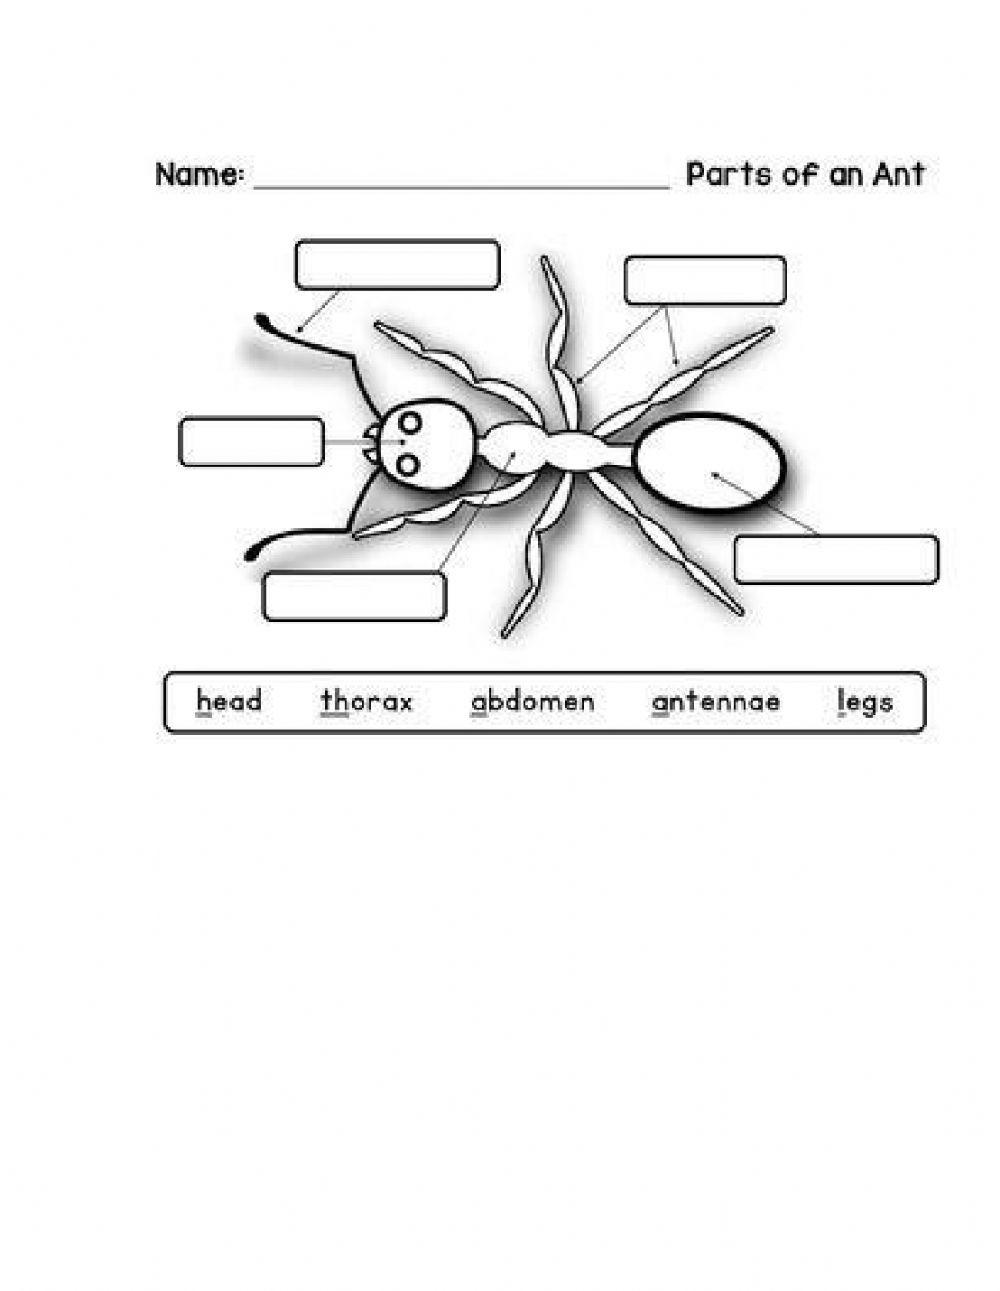 Parts of an insect